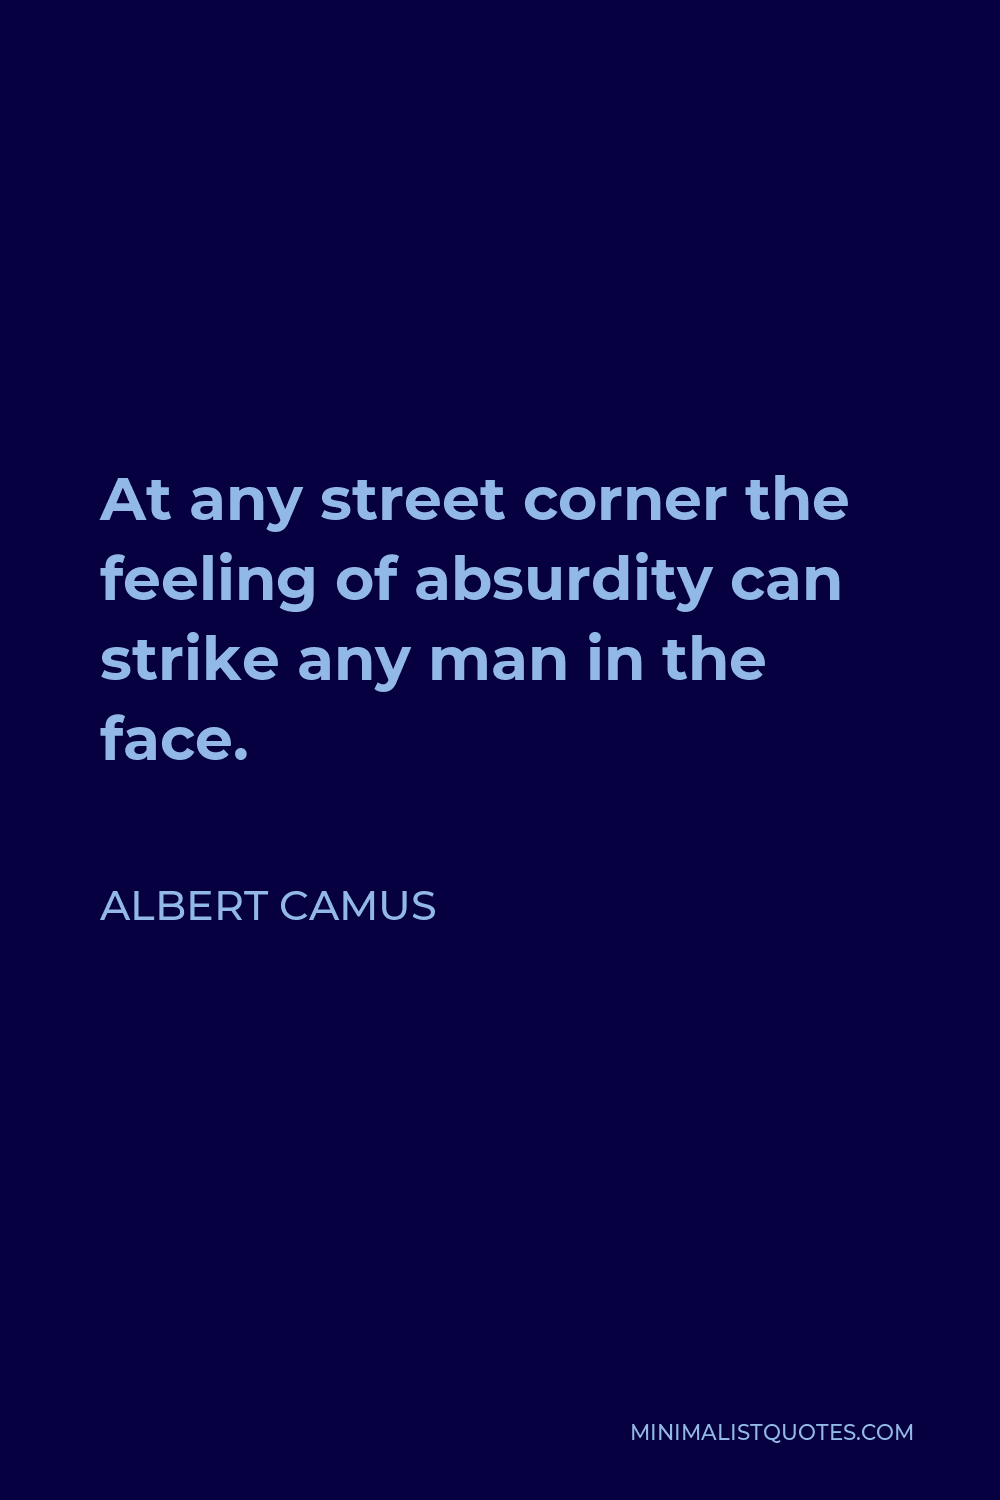 Albert Camus Quote - At any street corner the feeling of absurdity can strike any man in the face.